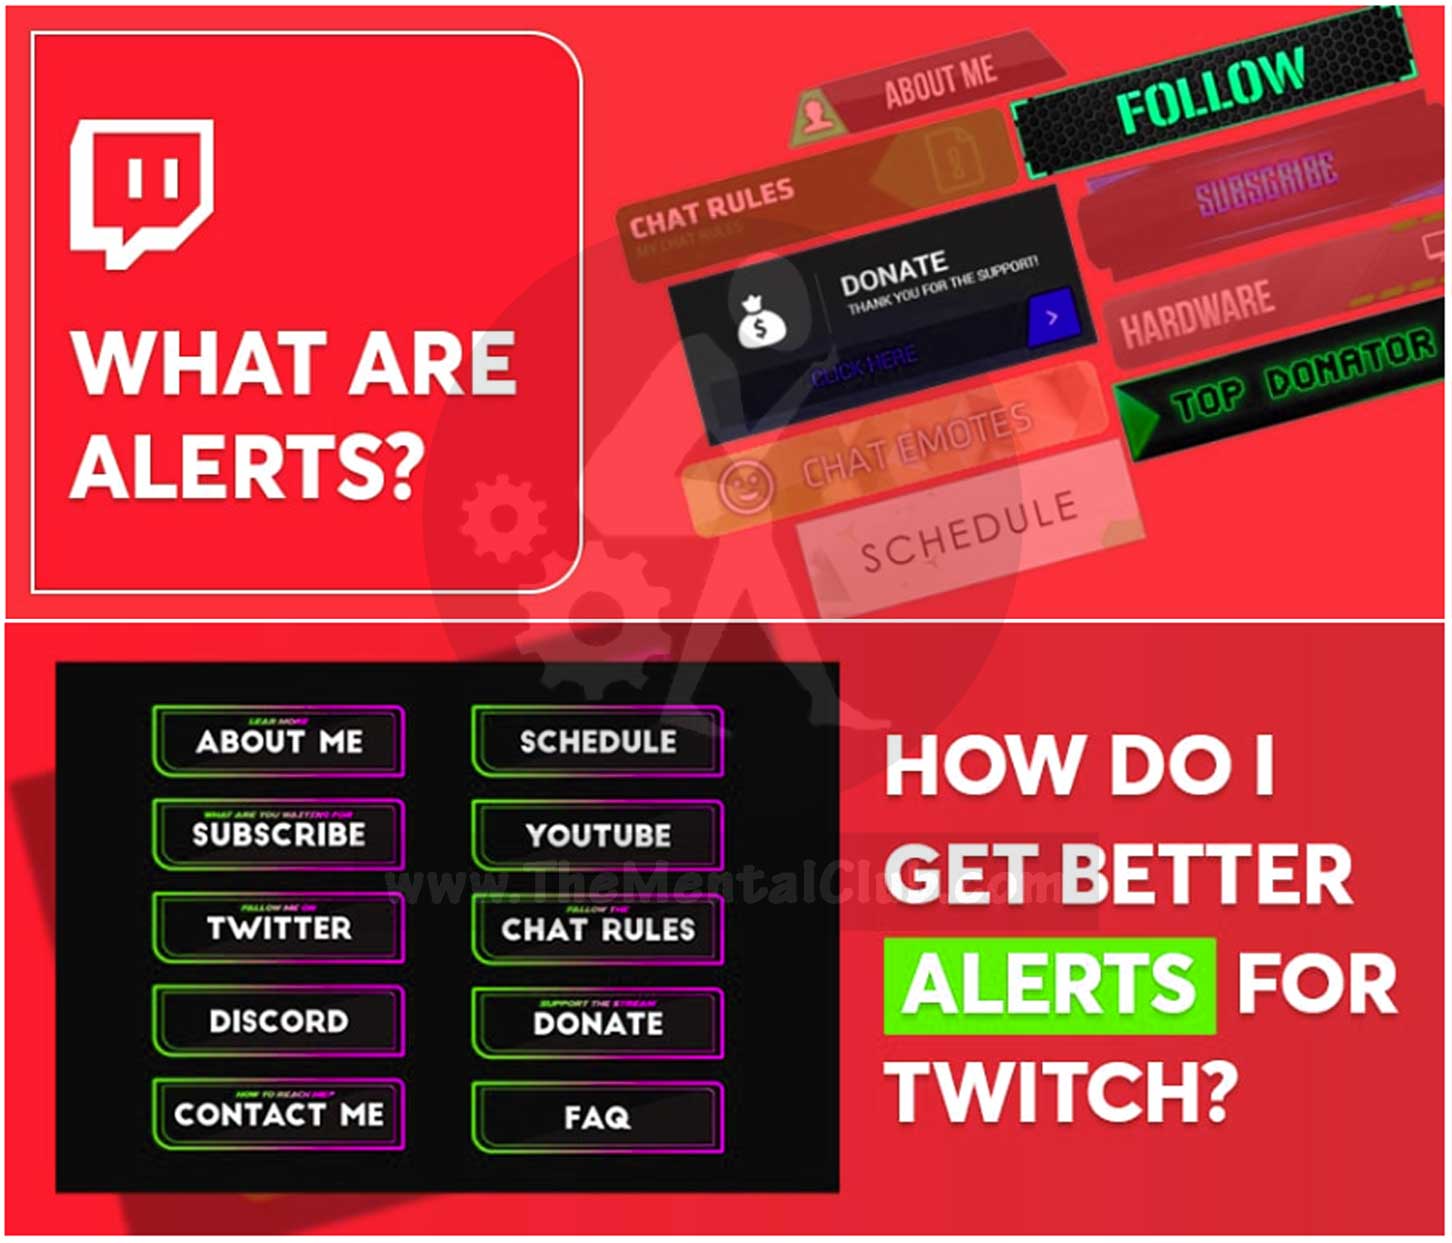 Customized Twitch Alerts for Streamers